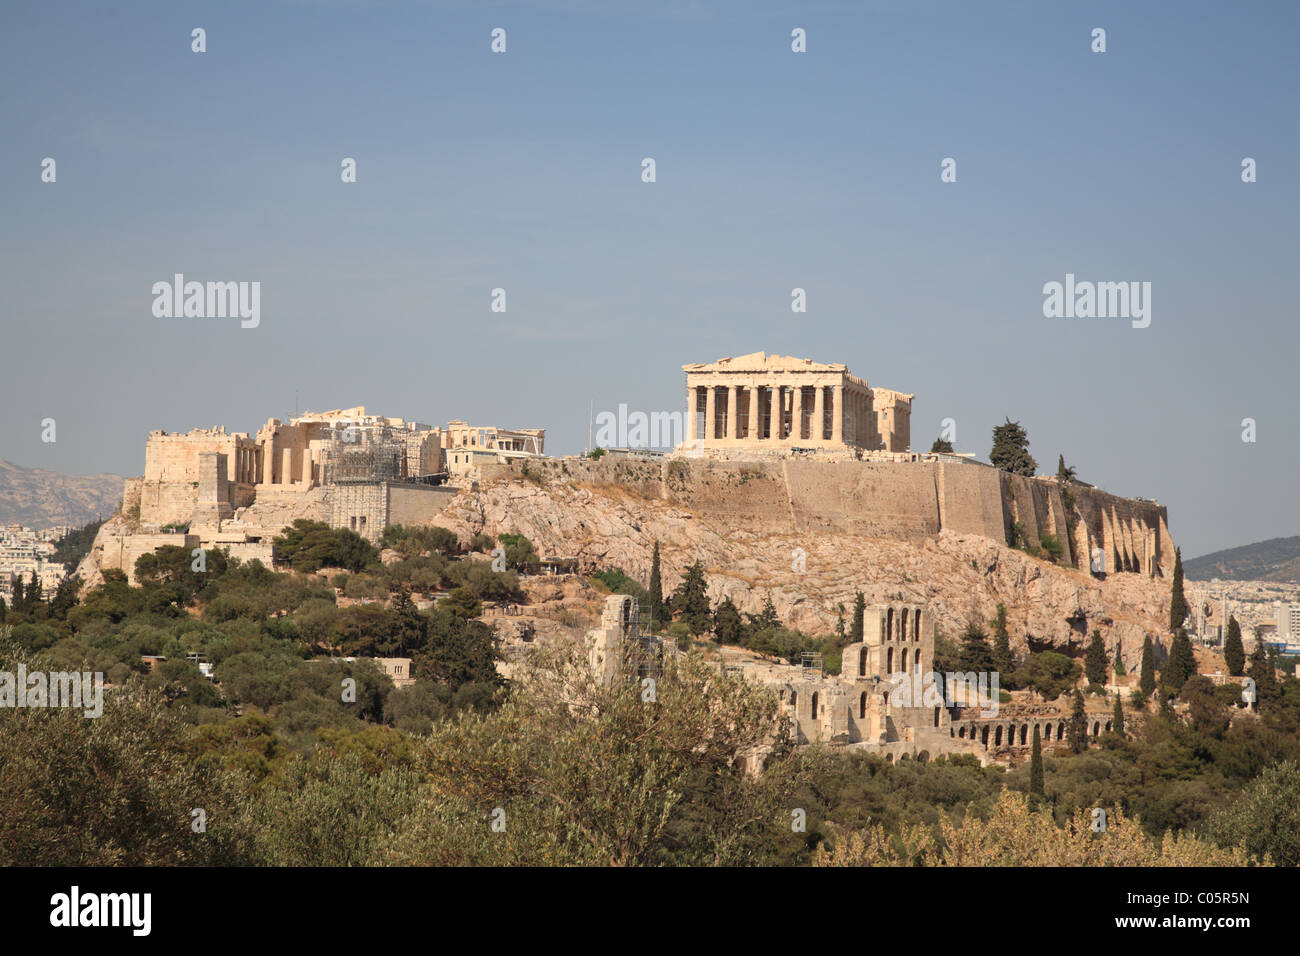 View of the Acropolis, Herodes Atticus Theatre and Parthenon from Filopappos Hill, Athens, Greece, Stock Photo